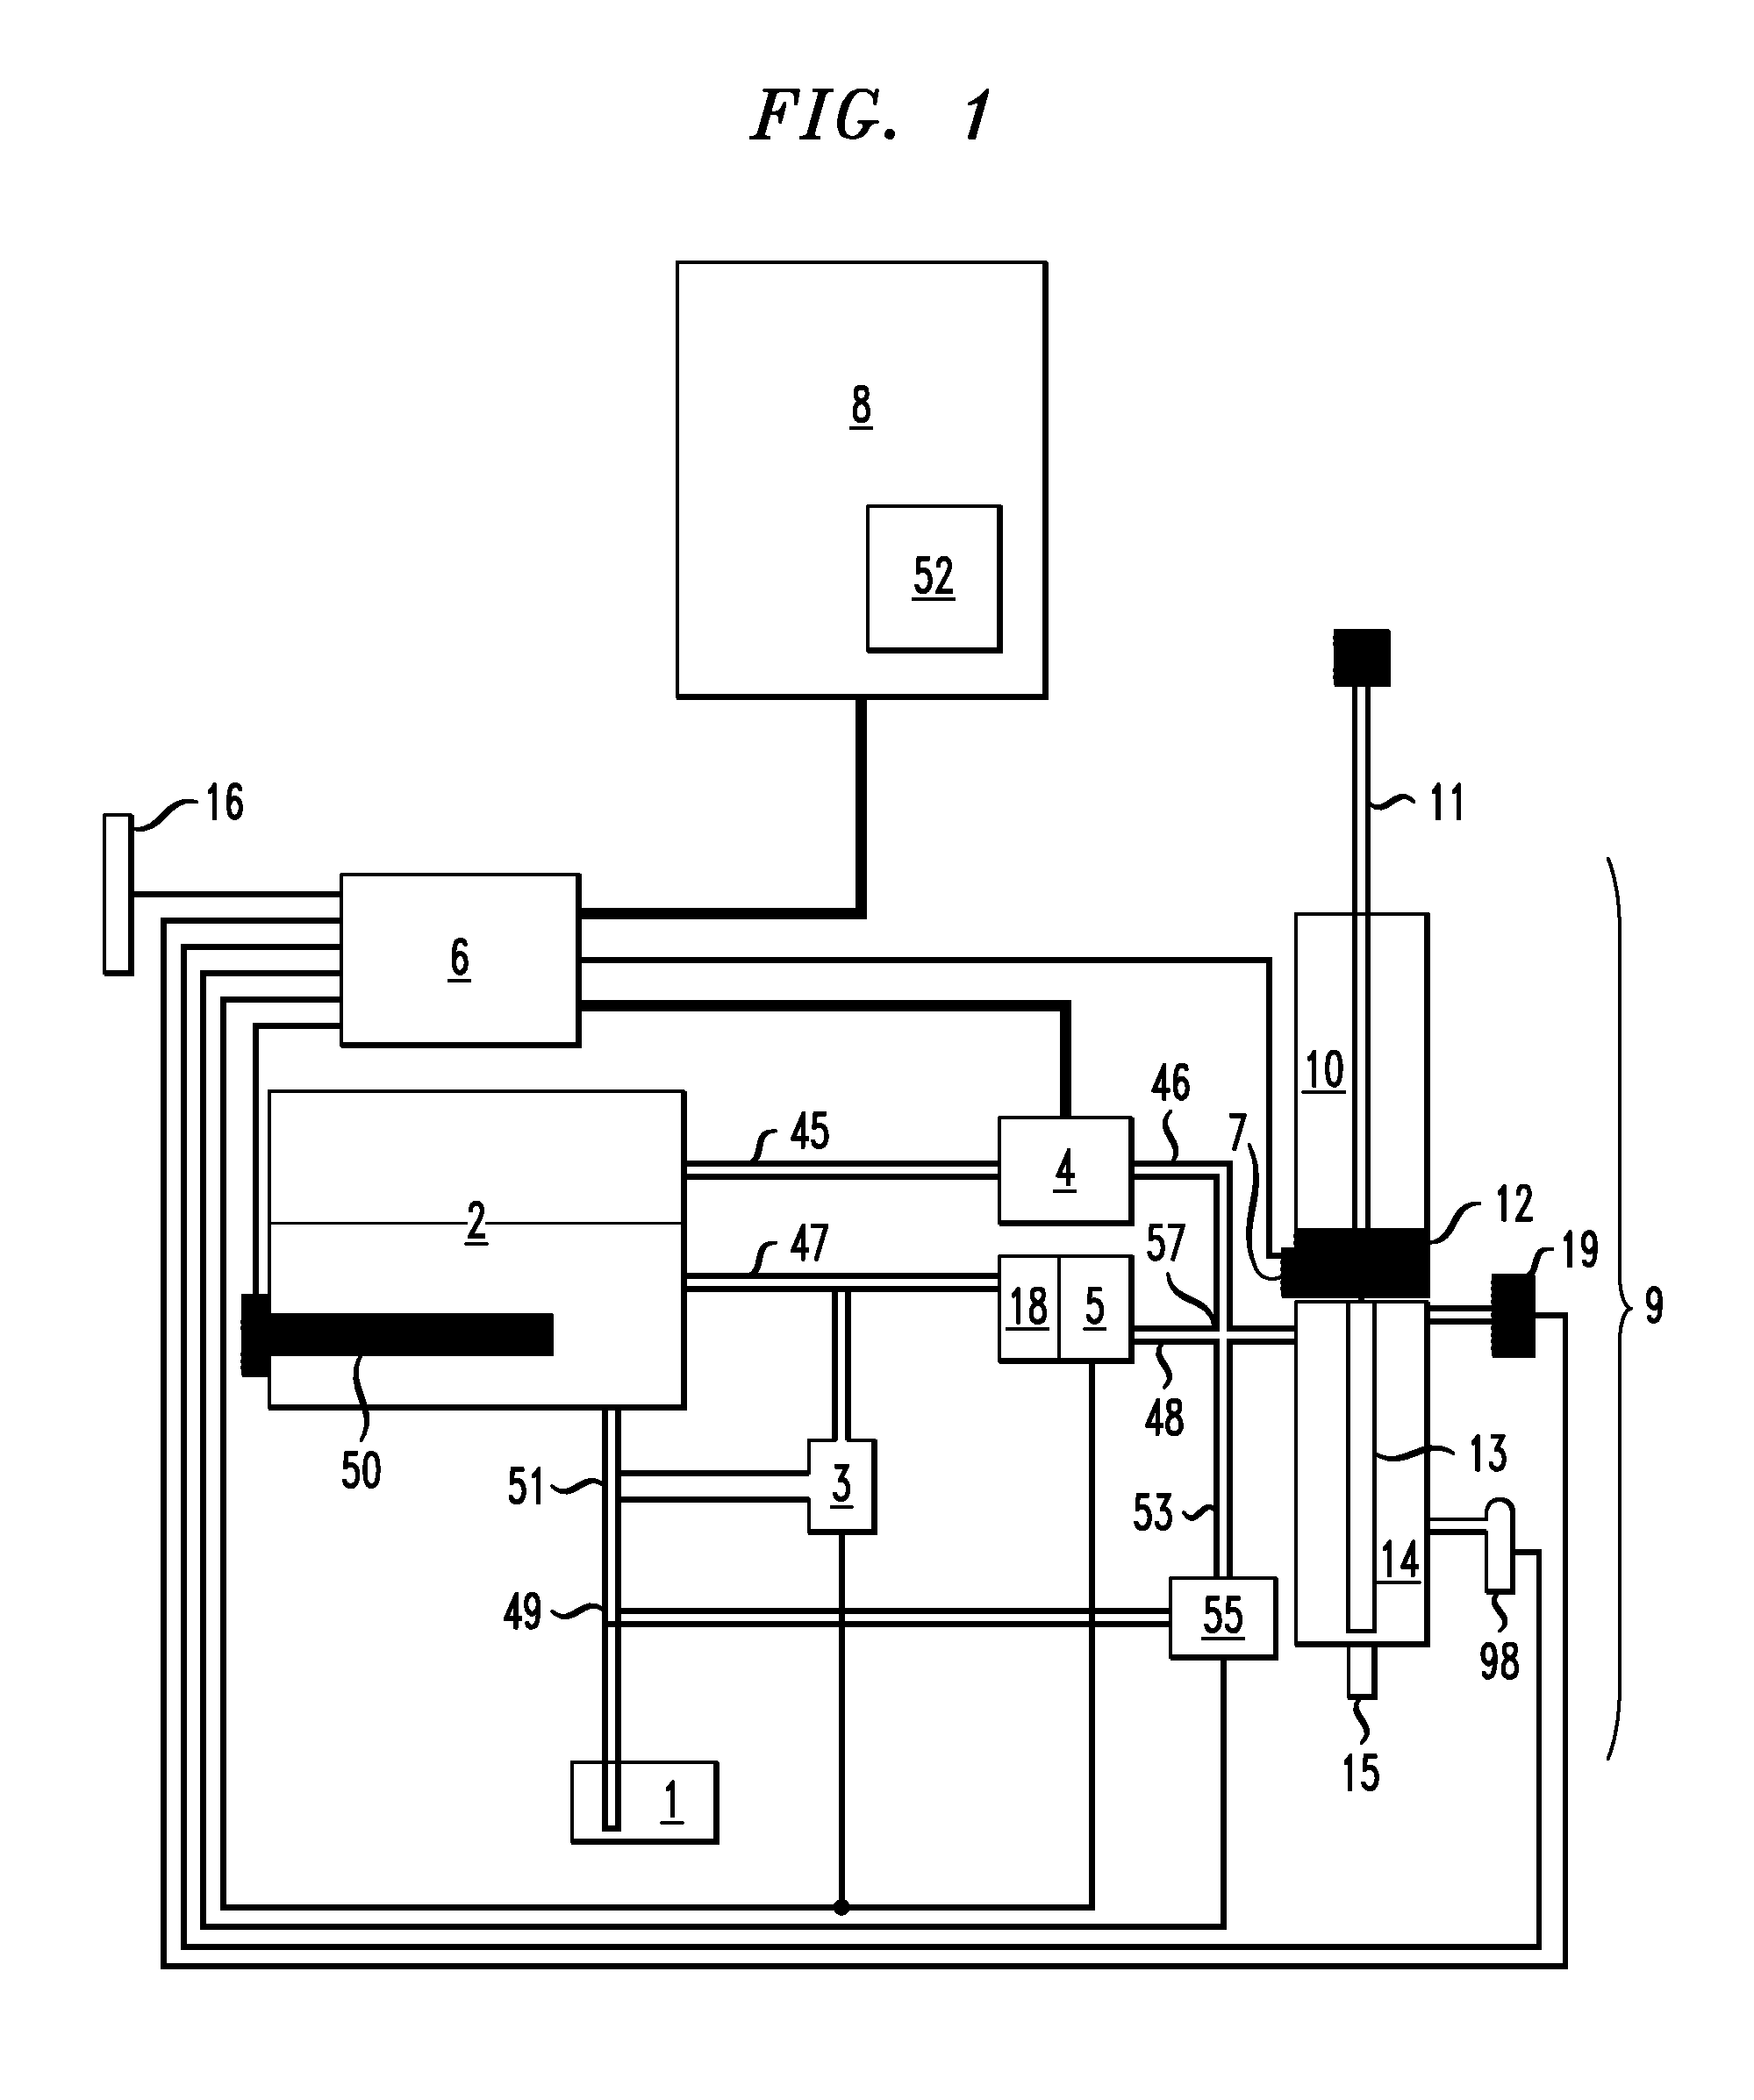 Hot beverage brewing system and use thereof